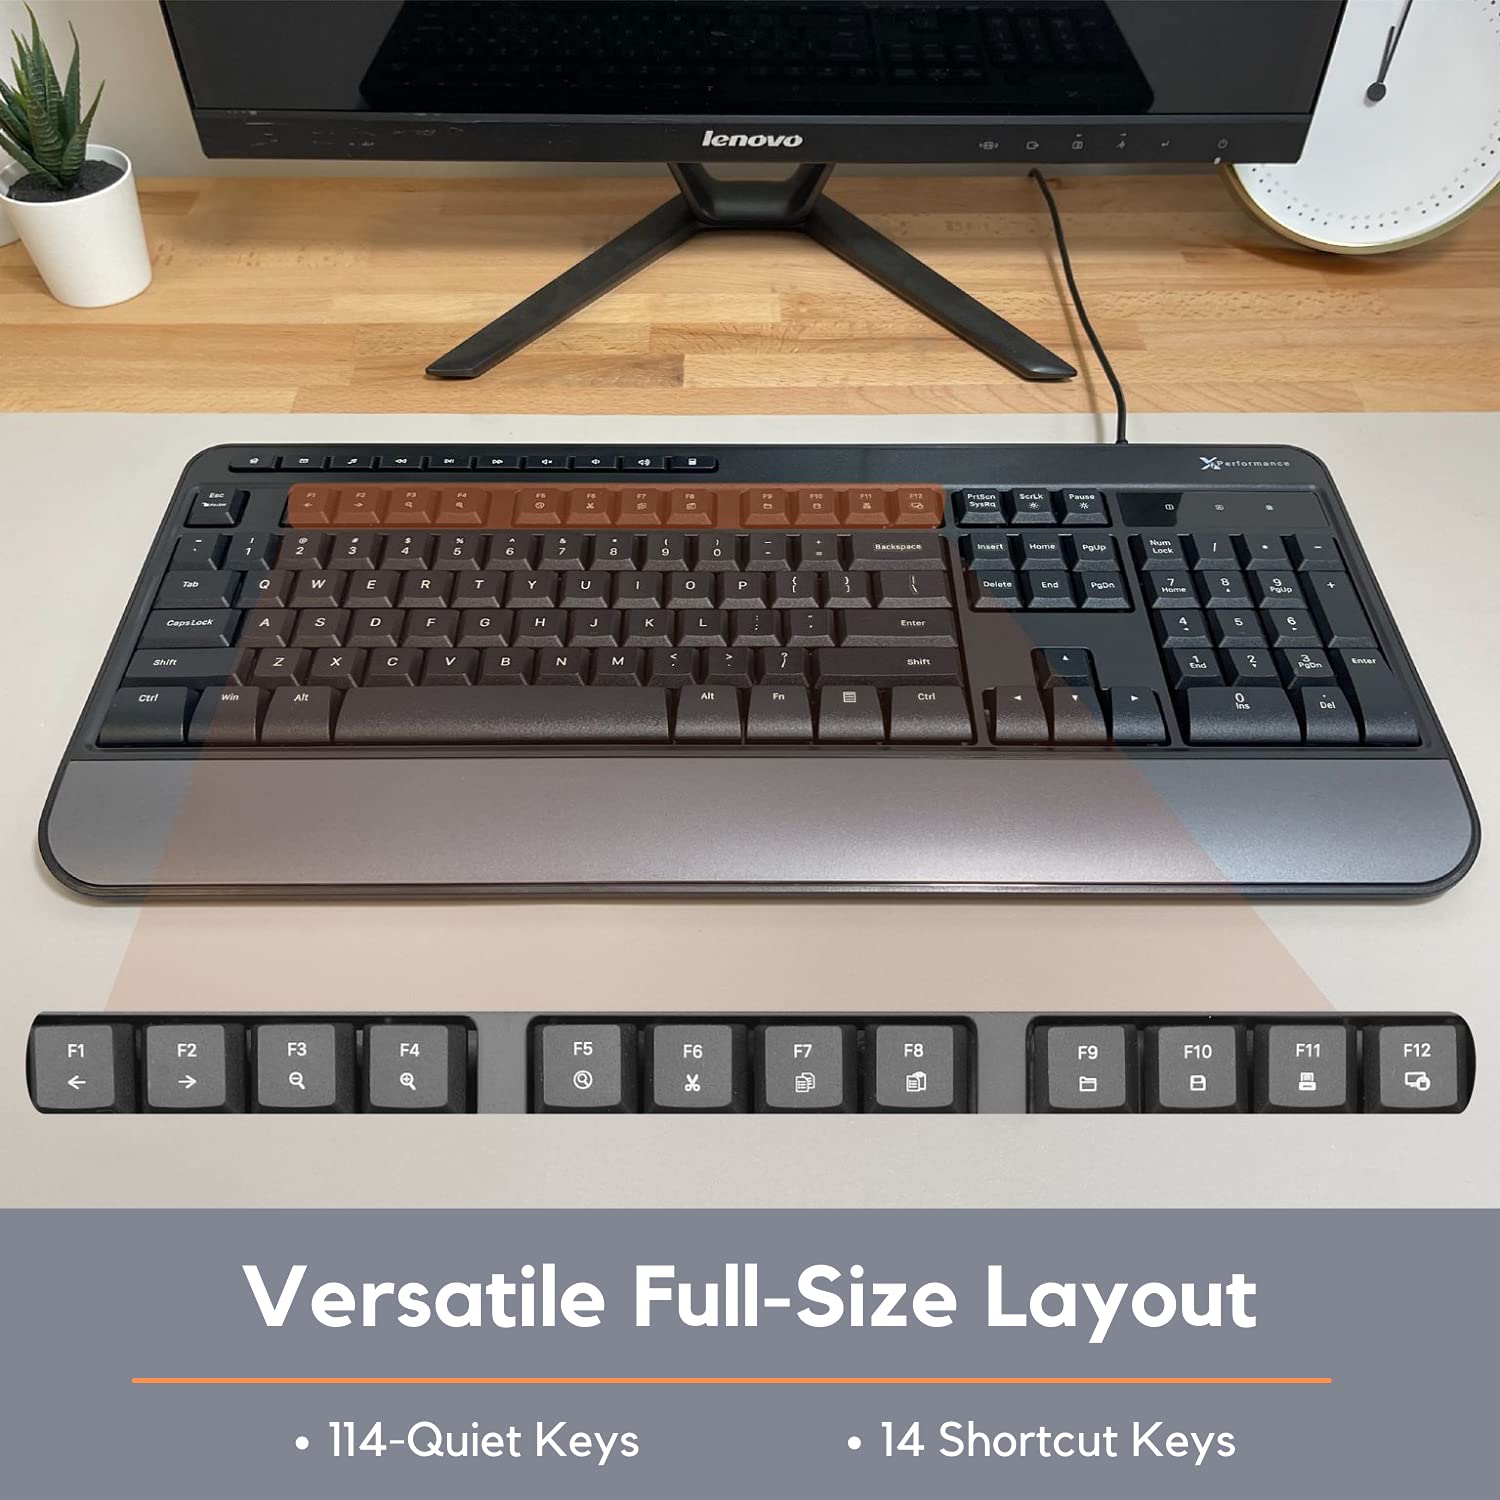 X9 Performance Multimedia USB Wired Keyboard - Take Control of Your Media - Ergonomic Full Size Keyboard with Wrist Rest and 114 Keys - External Computer Keyboard for Laptop and Office PC